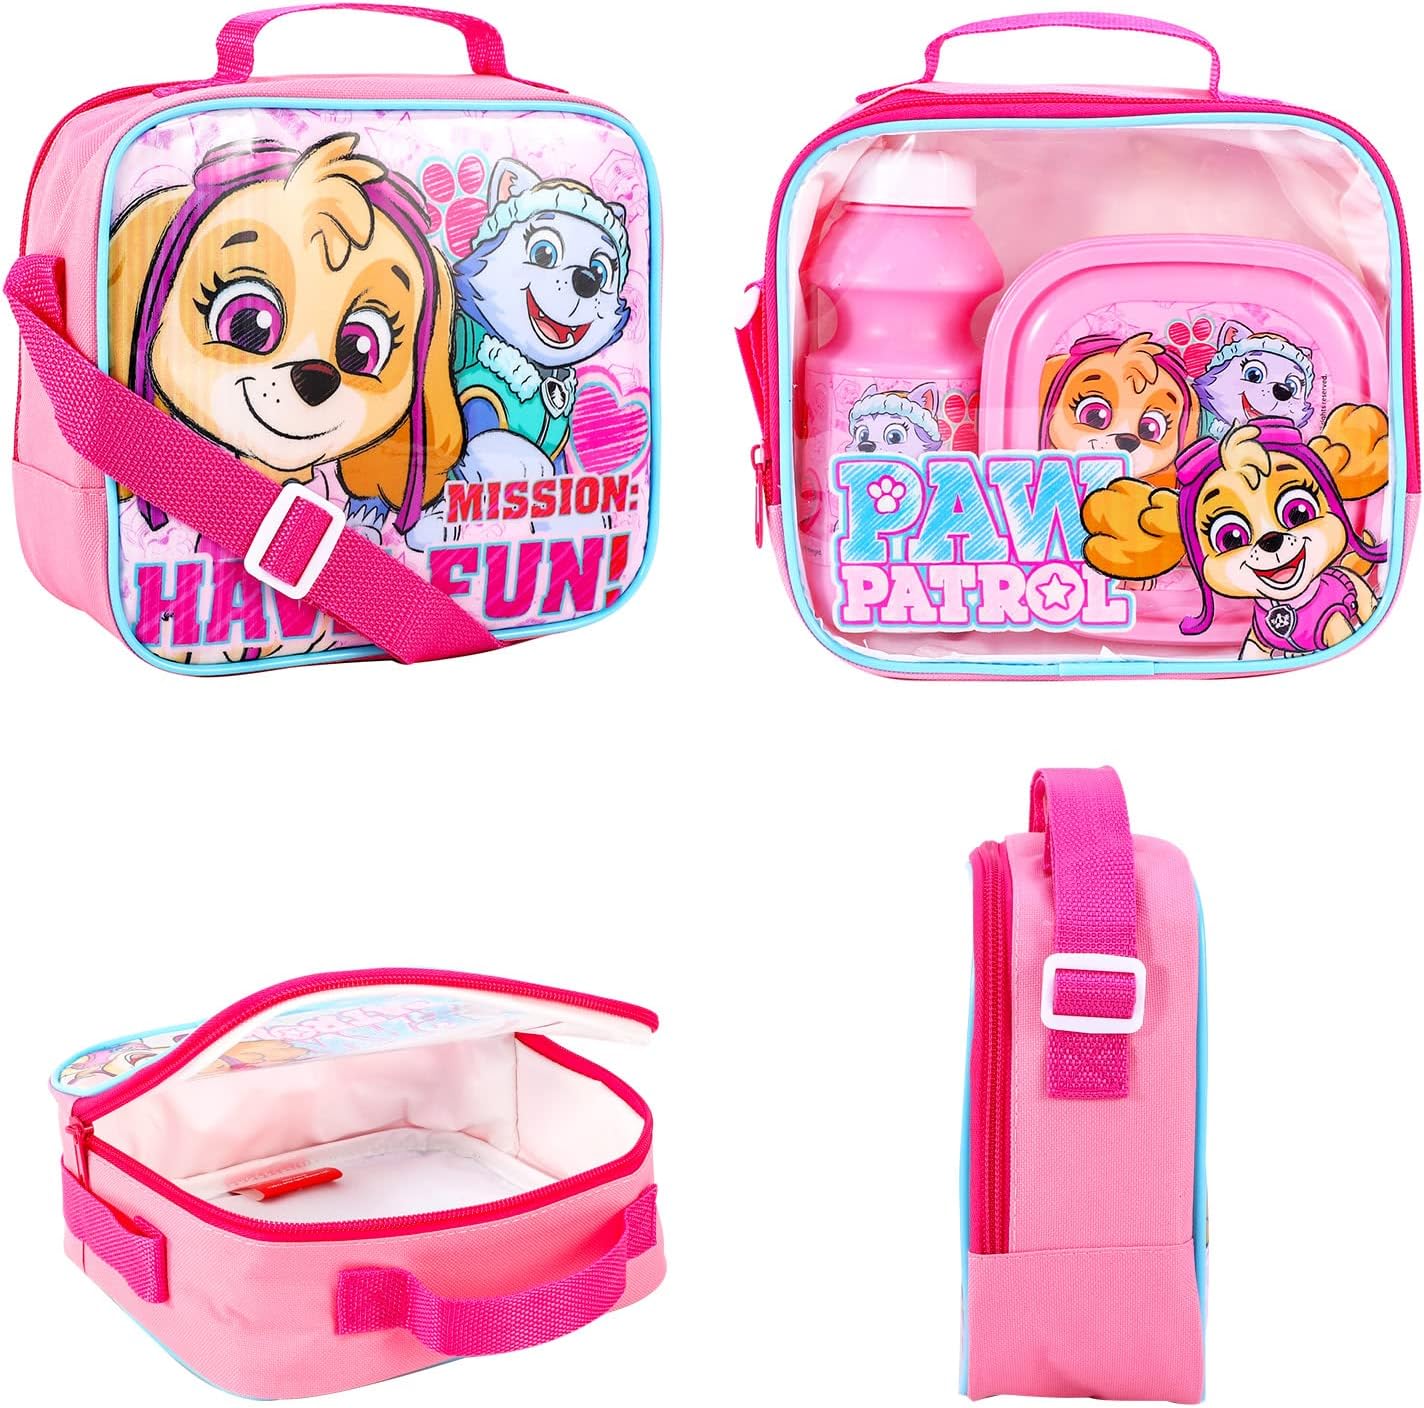 Lunch Box - Paw Patrol - Pink - Skye And Everest - Rainbow - Insulated